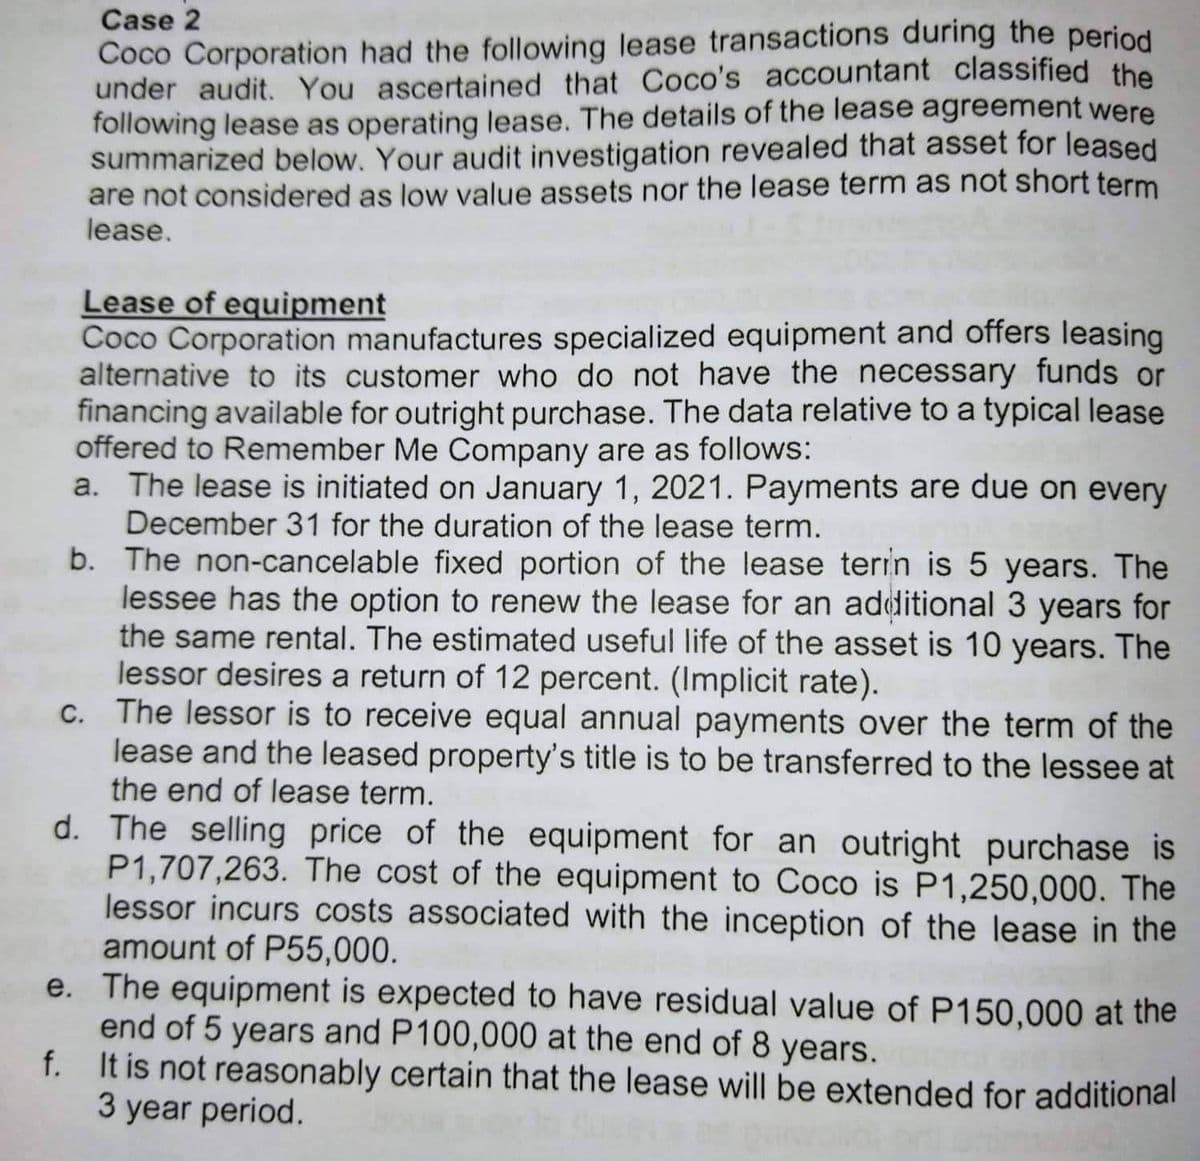 Case 2
Coco Corporation had the following lease transactions during the period
under audit. You ascertained that Coco's accountant classified the
following lease as operating lease. The details of the lease agreement were
summarized below. Your audit investigation revealed that asset for leased
are not considered as low value assets nor the lease term as not short term
lease.
Lease of equipment
Coco Corporation manufactures specialized equipment and offers leasing
alternative to its customer who do not have the necessary funds or
financing available for outright purchase. The data relative to a typical lease
offered to Remember Me Company are as follows:
a. The lease is initiated on January 1, 2021. Payments are due on every
December 31 for the duration of the lease term.
b. The non-cancelable fixed portion of the lease terin is 5 years. The
lessee has the option to renew the lease for an additional 3 years for
the same rental. The estimated useful life of the asset is 10 years. The
lessor desires a return of 12 percent. (Implicit rate).
c. The lessor is to receive equal annual payments over the term of the
lease and the leased property's title is to be transferred to the lessee at
the end of lease term.
d. The selling price of the equipment for an outright purchase is
P1,707,263. The cost of the equipment to Coco is P1,250,000. The
lessor incurs costs associated with the inception of the lease in the
amount of P55,000.
e.
The equipment is expected to have residual value of P150,000 at the
end of 5 years and P100,000 at the end of 8 years.
f.
It is not reasonably certain that the lease will be extended for additional
3 year period.